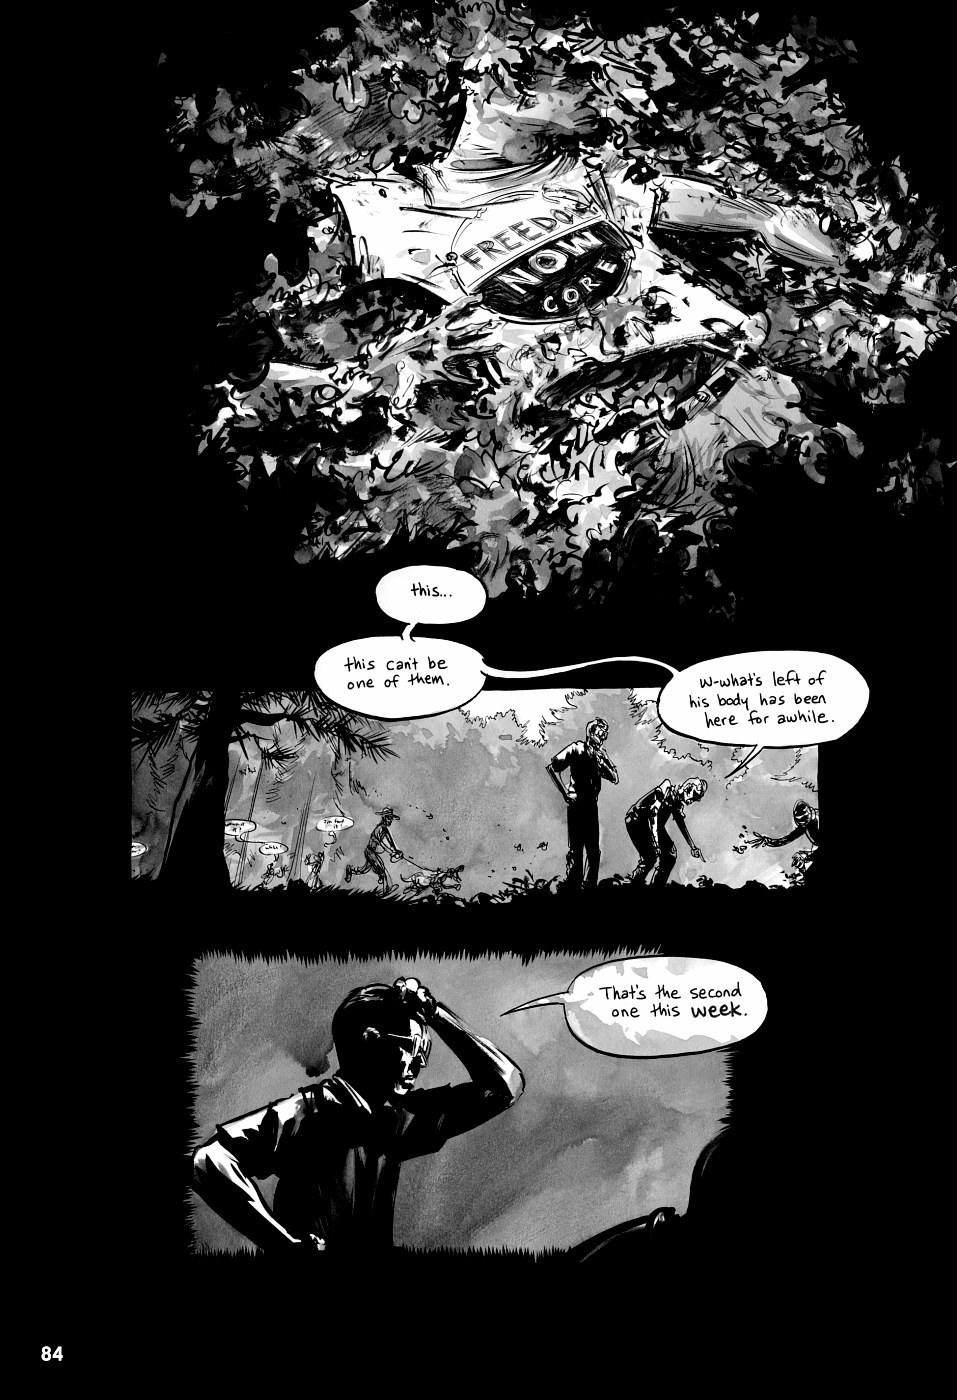 page 84 of march book three graphic novel